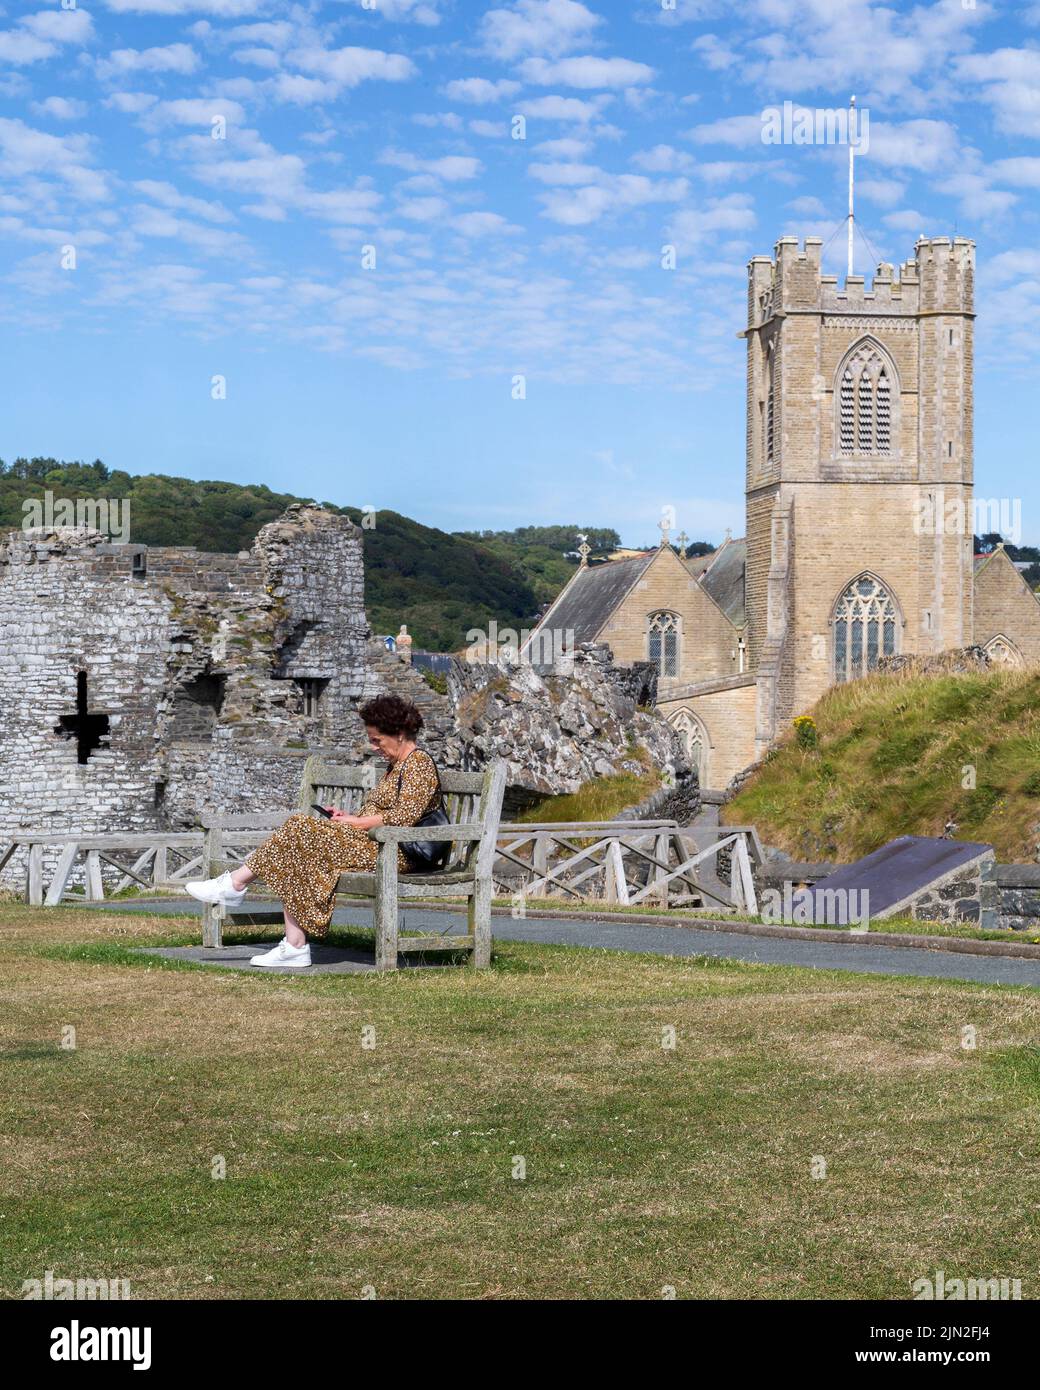 A woman looks at her phone while sitting on a bench in the grounds of Aberystwyth castle. St. Michael's church is seen beyond part of the castle ruin. Stock Photo